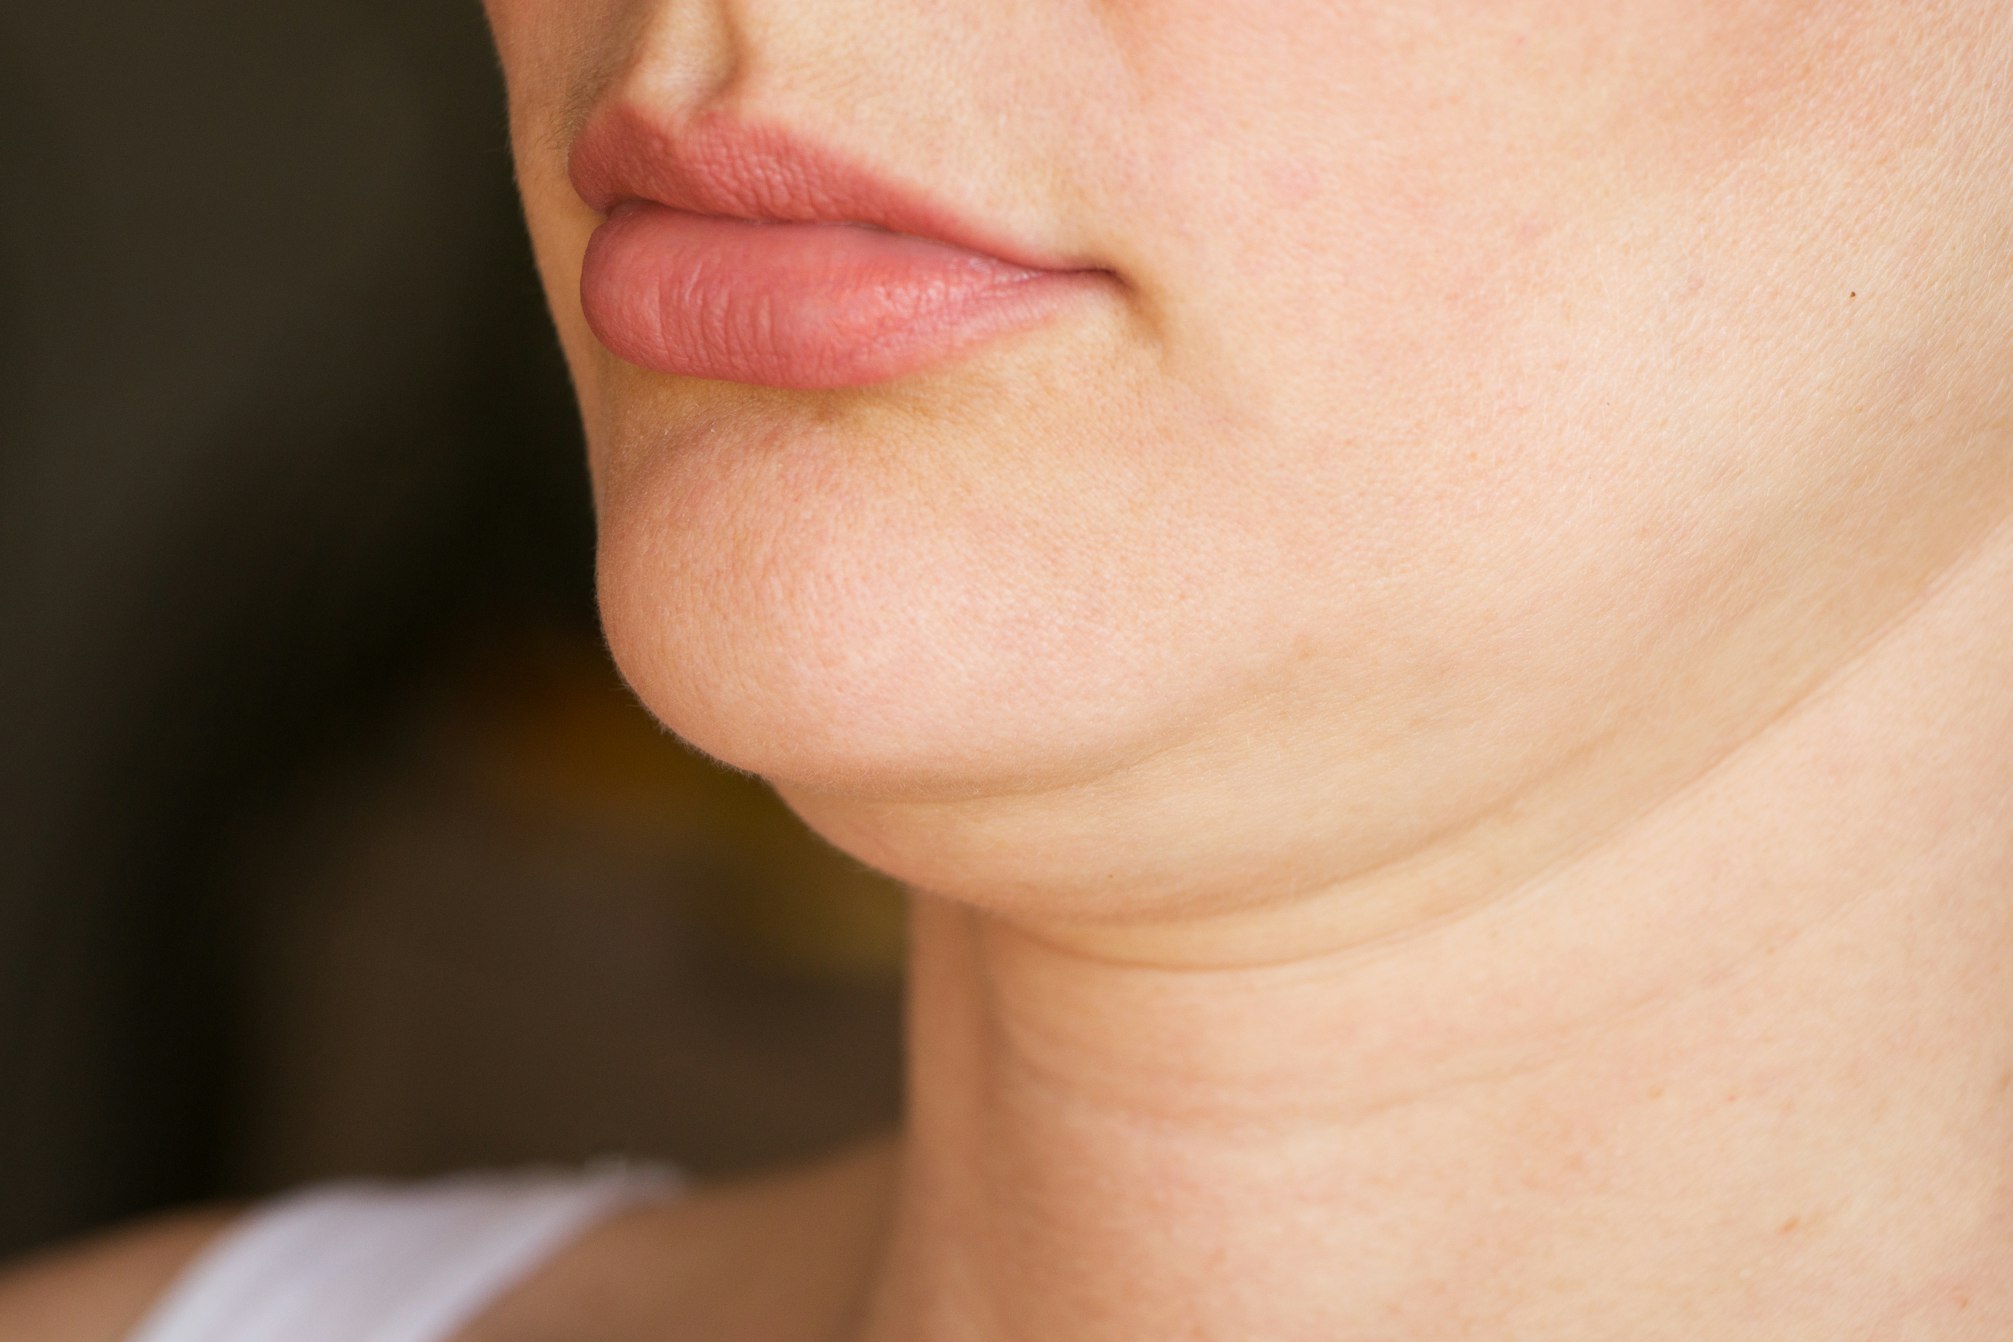 Chin Liposuction and Alternatives To Look Into For Utah Residents 